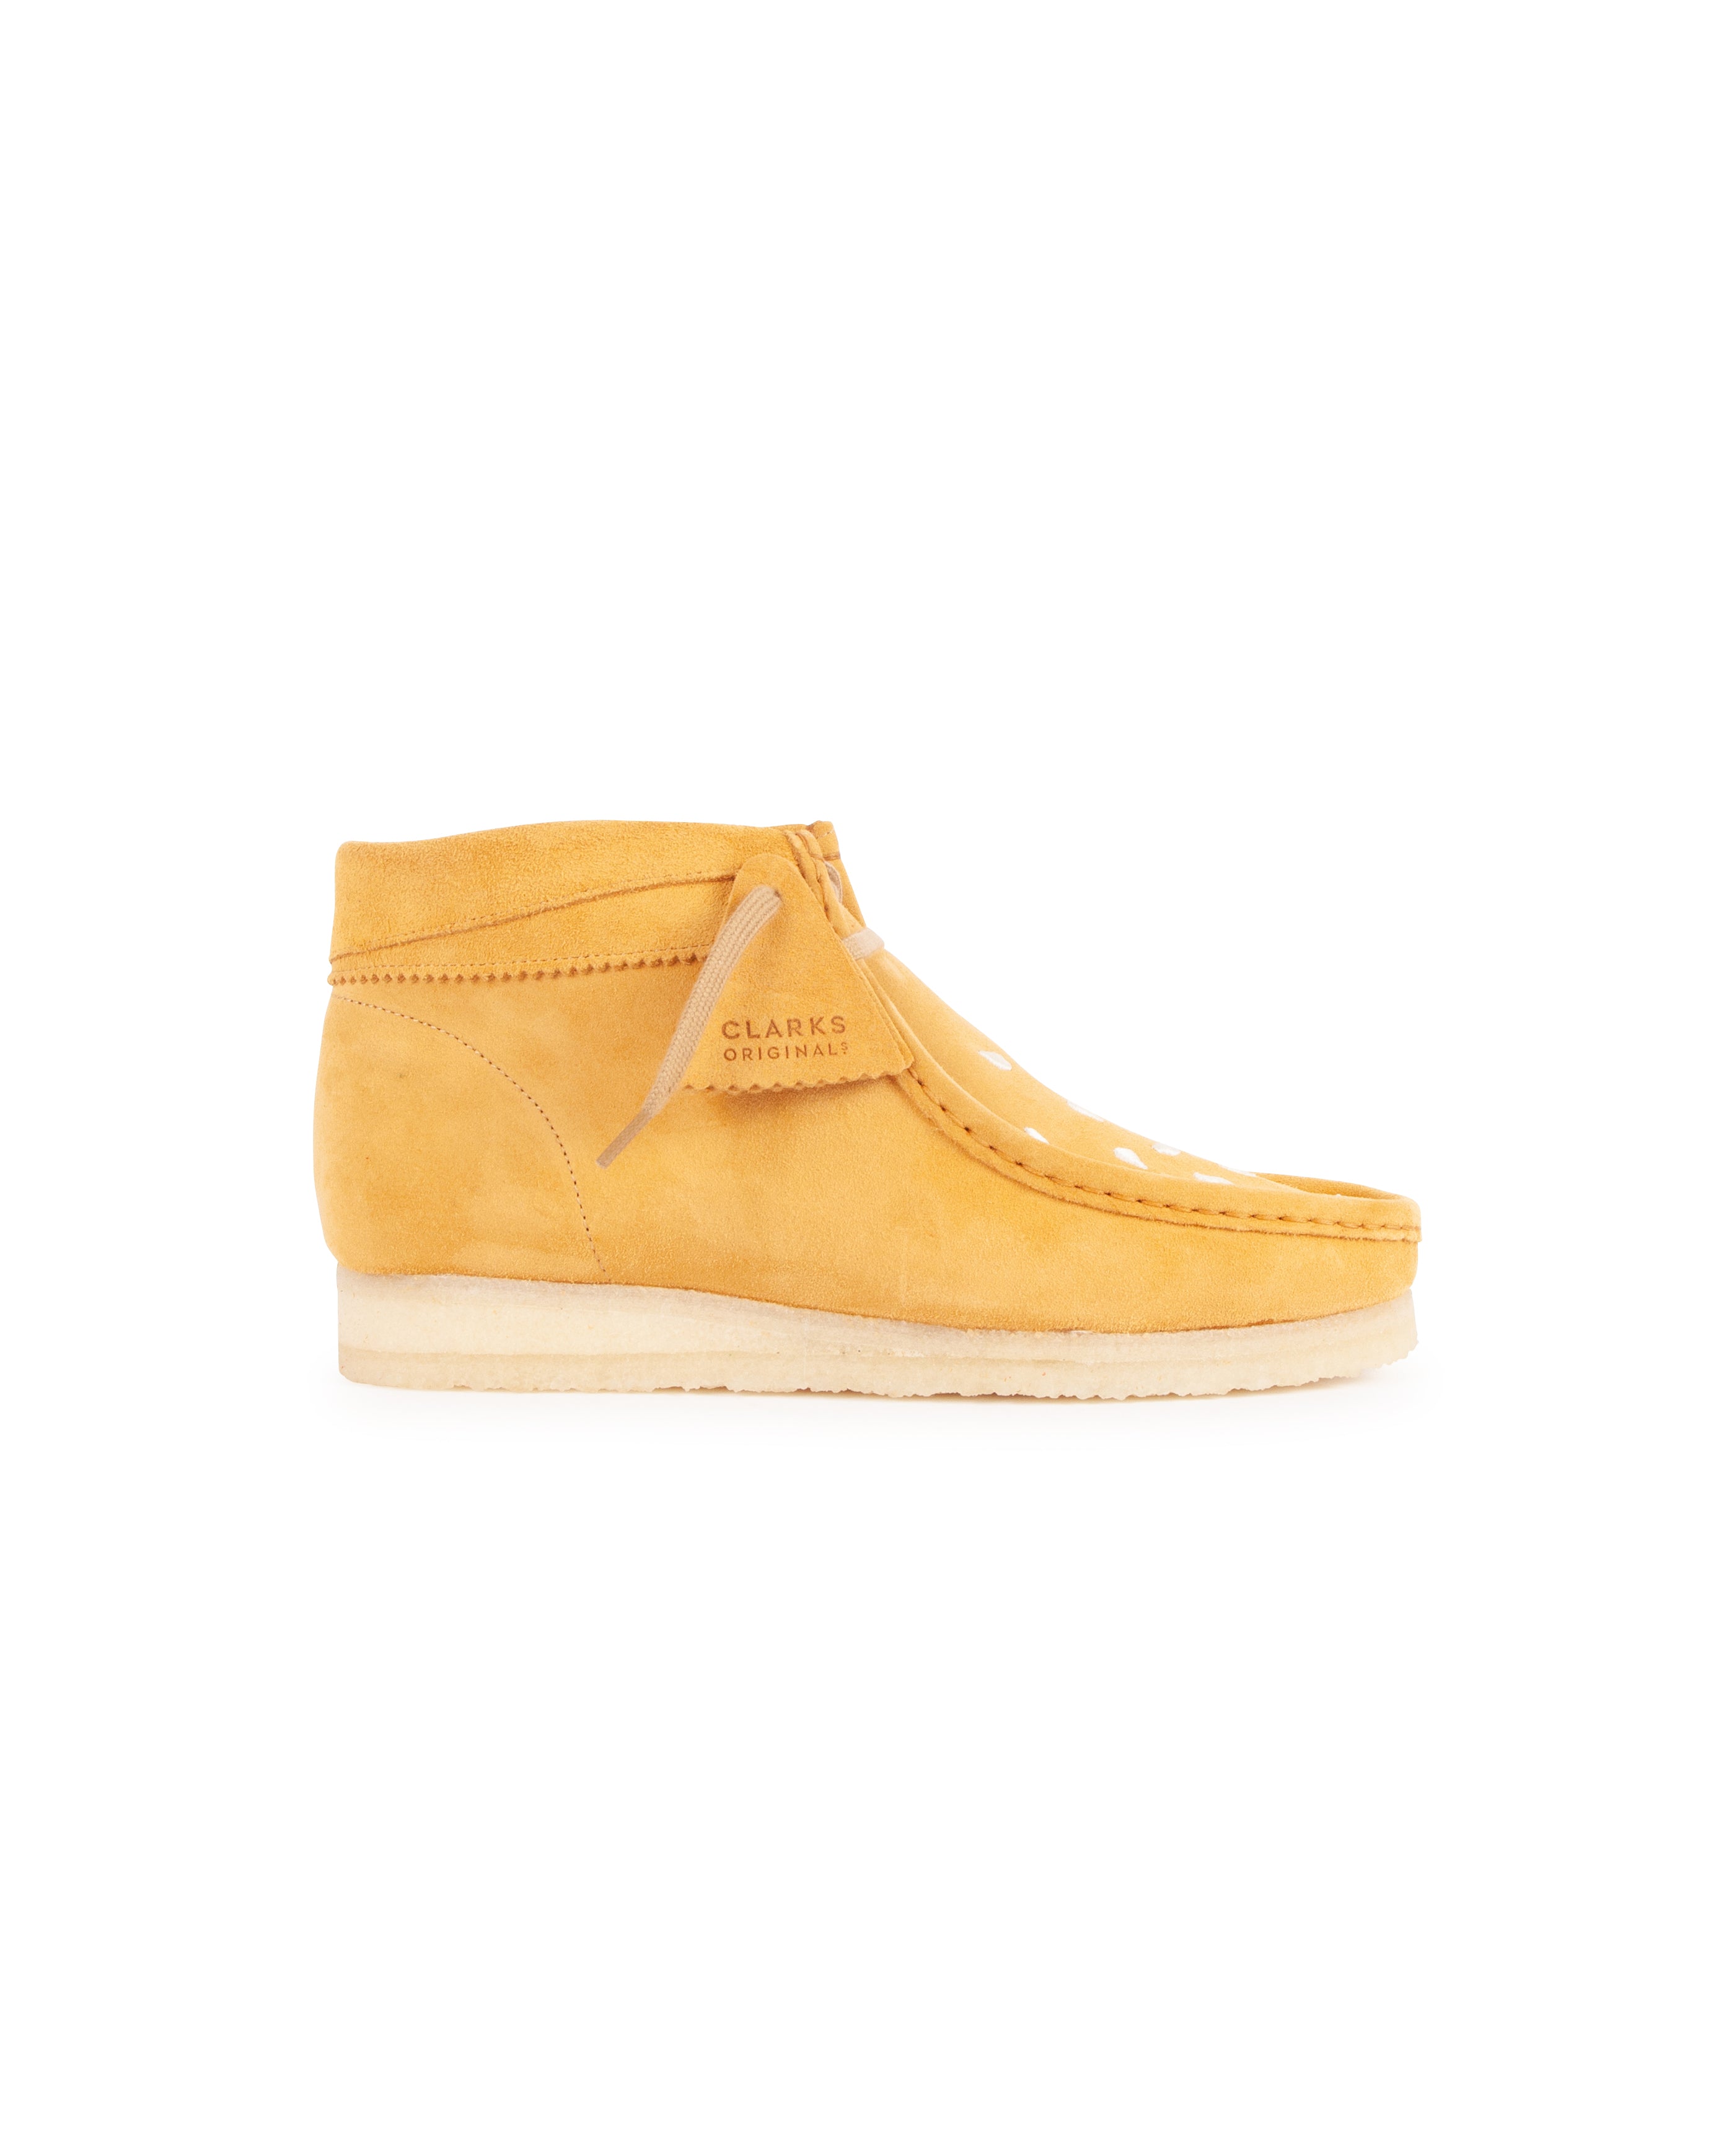 Clarks x Vandy the Pink Wallabee Boot, 261759407, tan at solebox